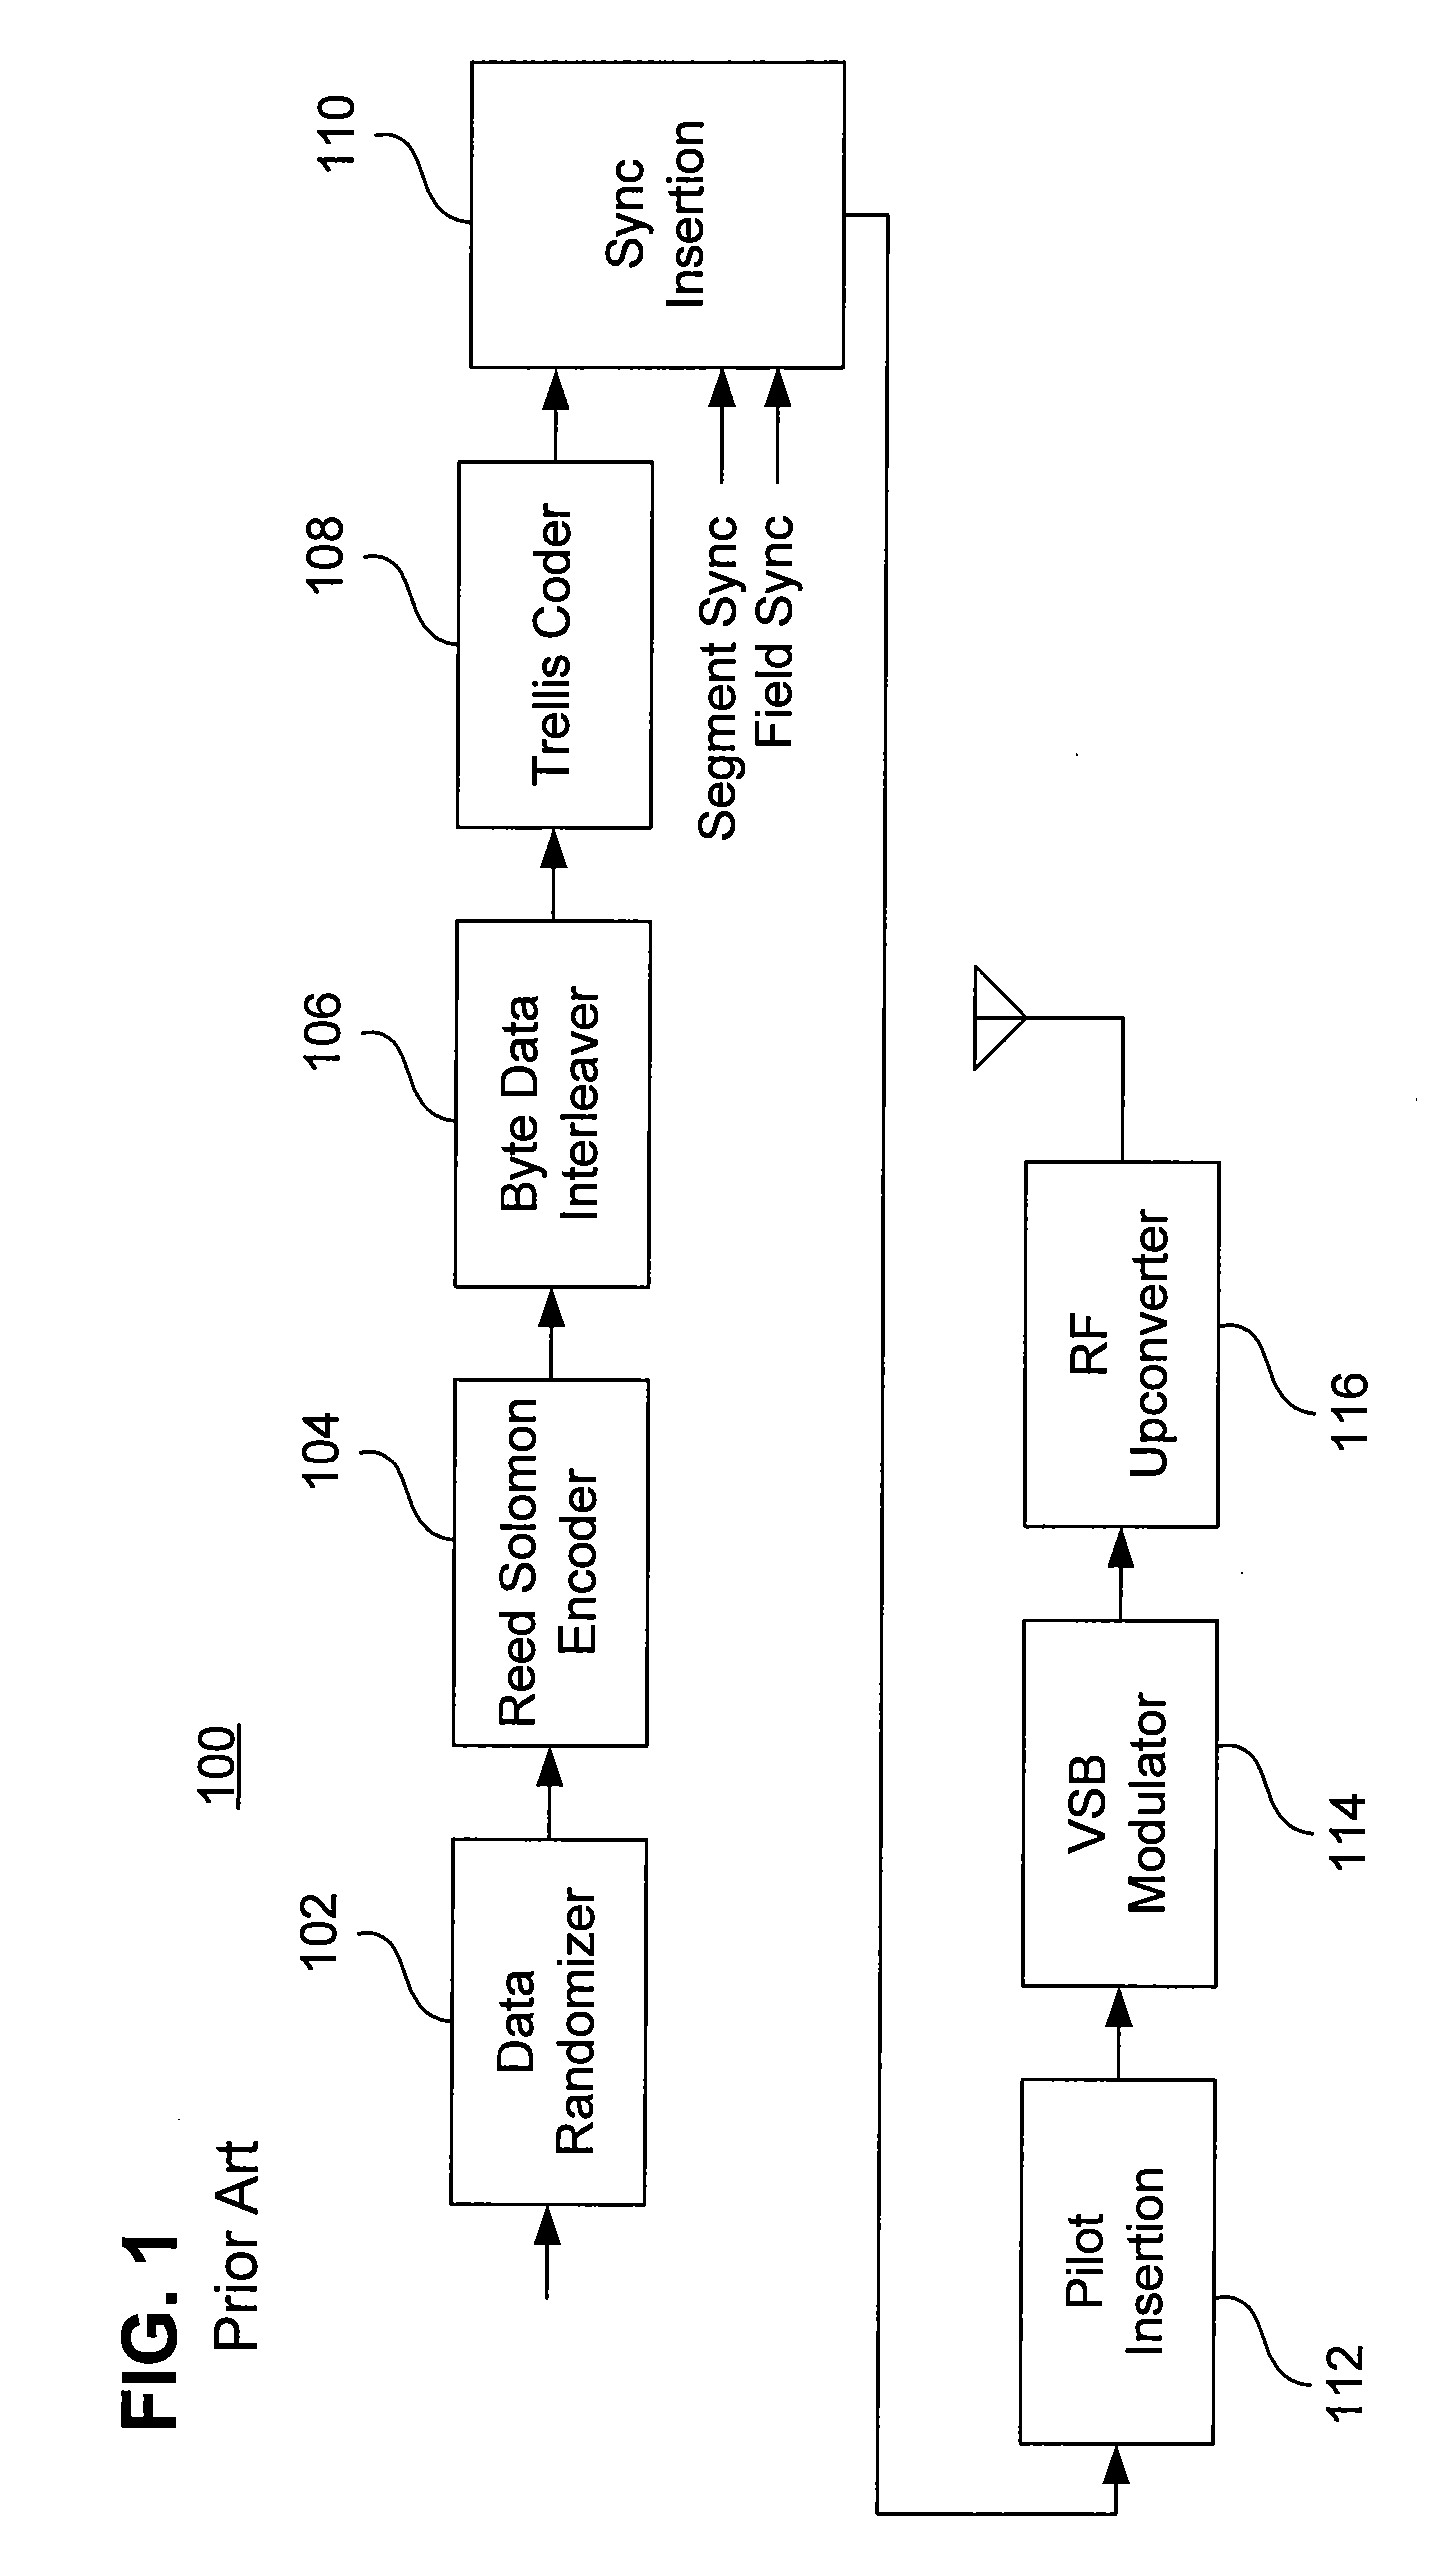 Apparatus, systems, methods and computer products for providing a virtual enhanced training sequence